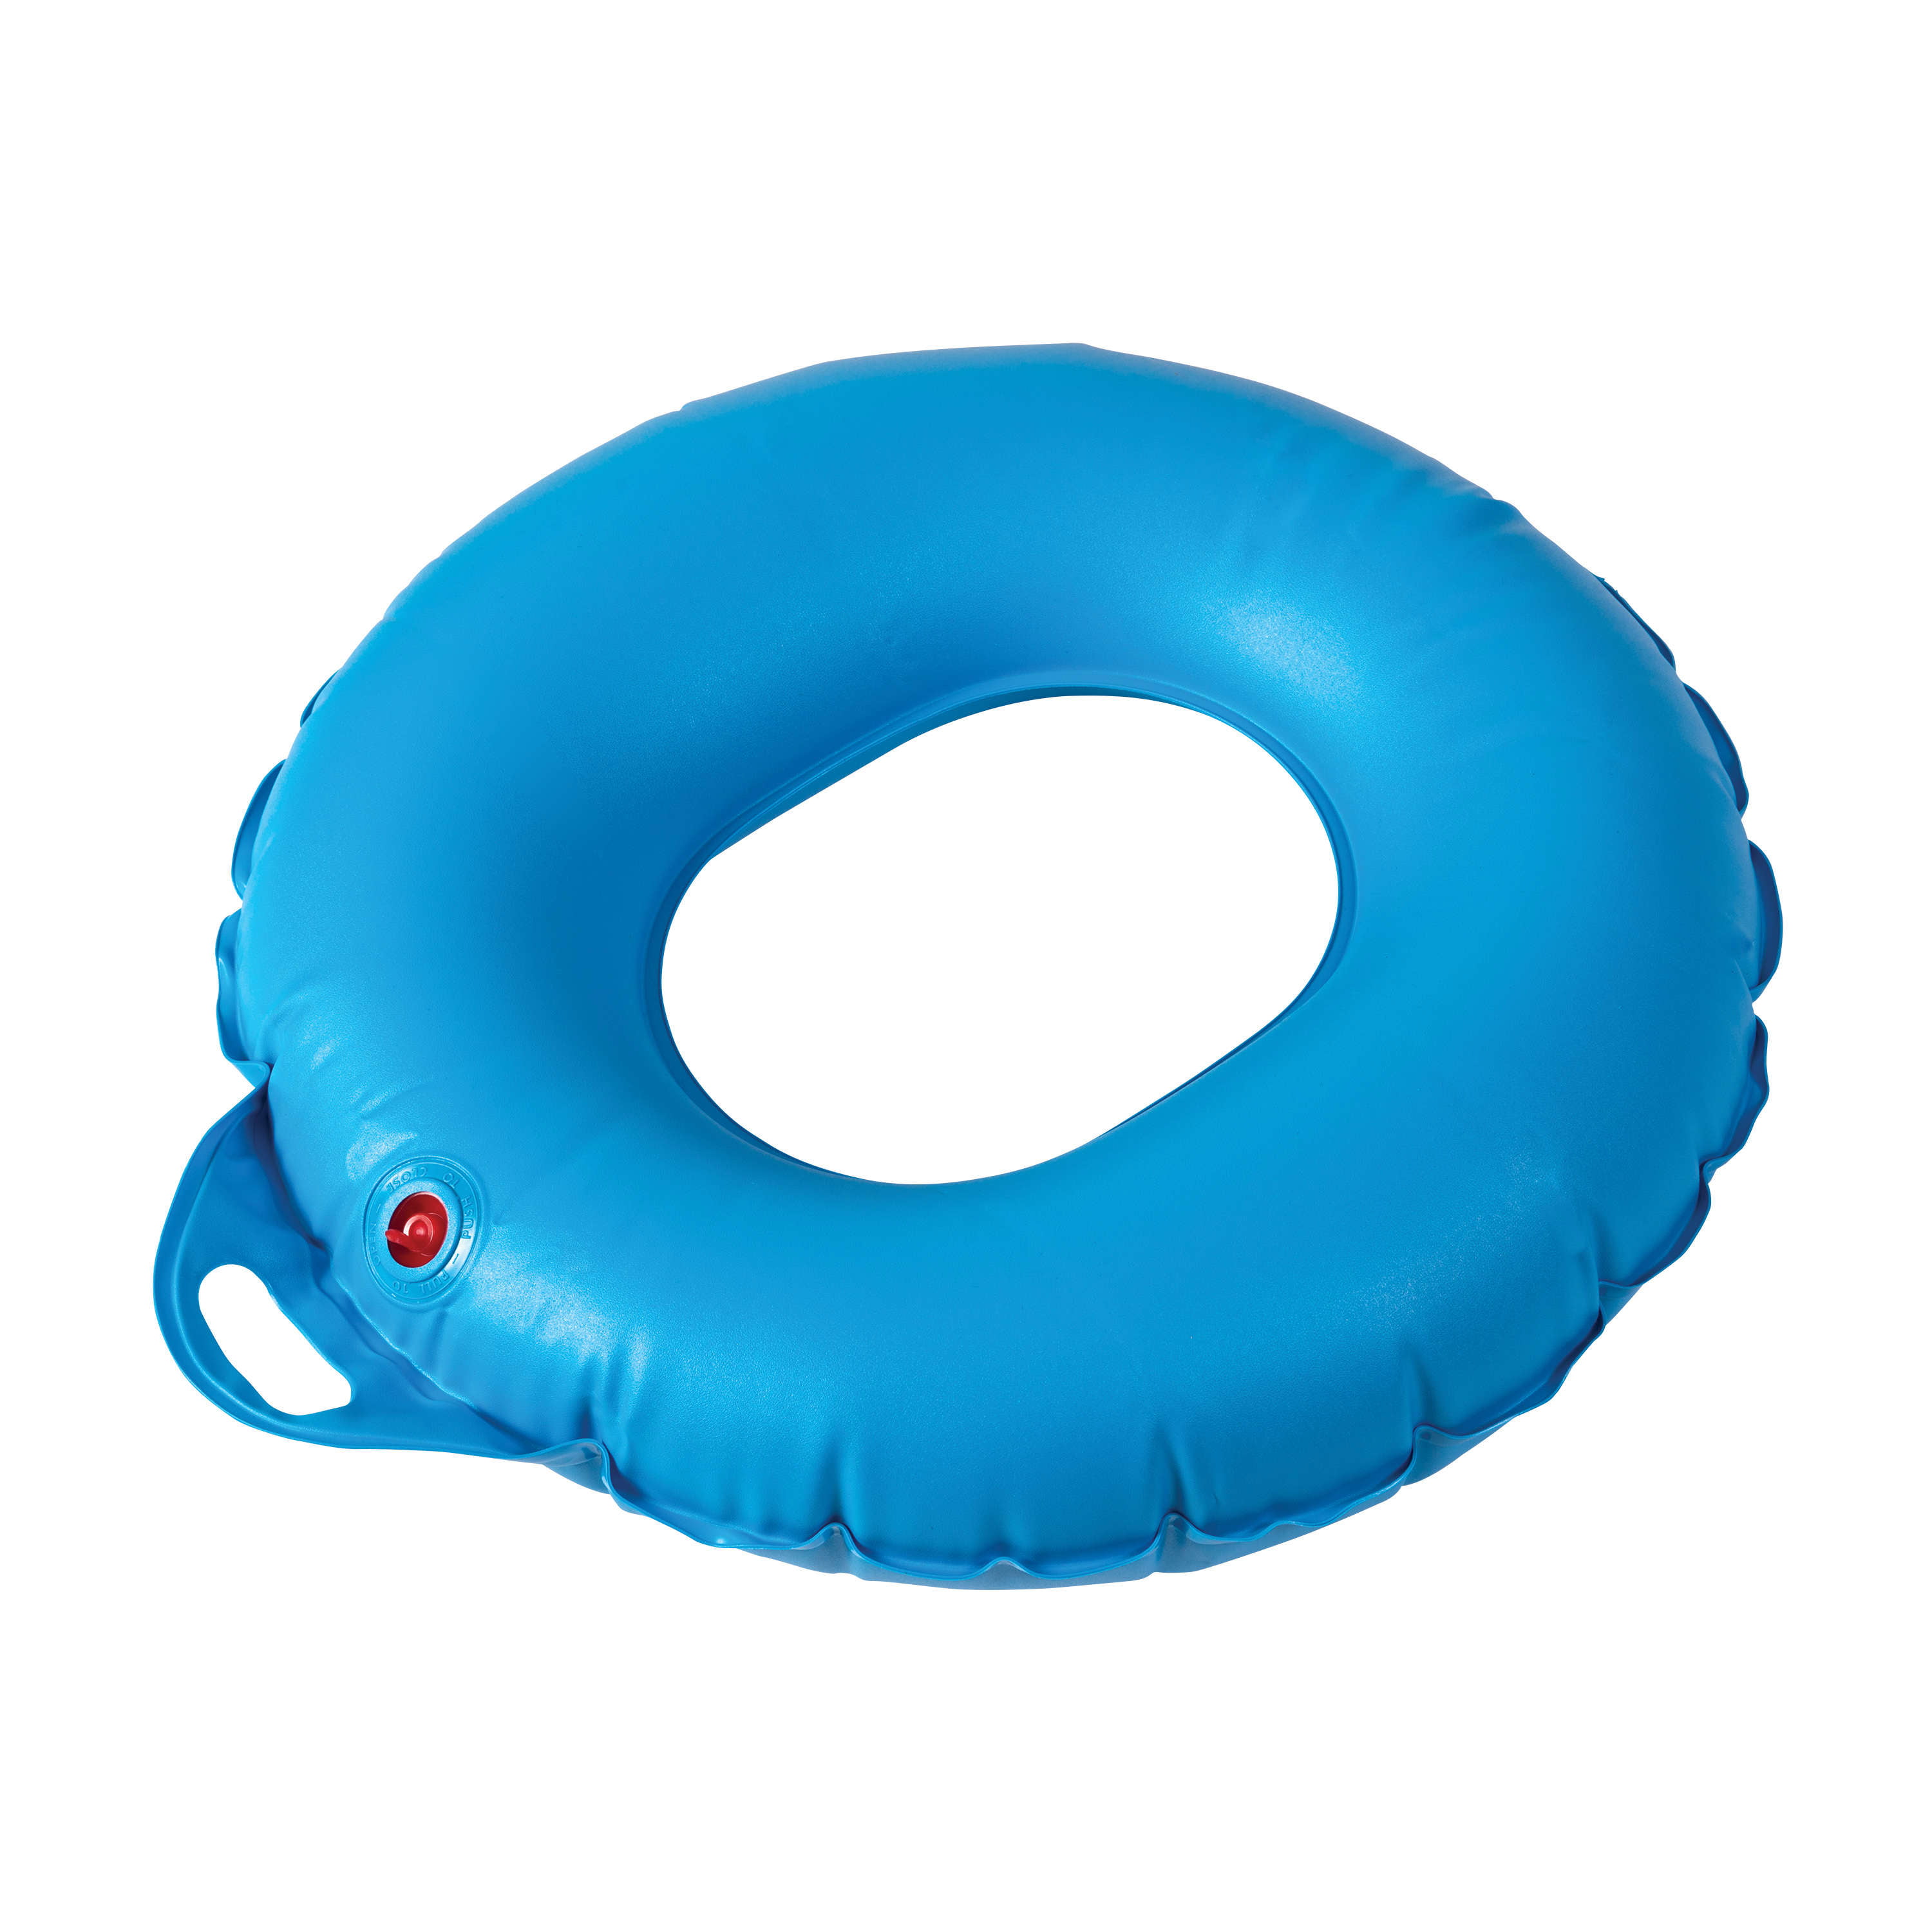 FUYGRCJ Inflatable Donut Seat Cushion for Long Sitting Leakproof Inflatable  Donut Pillow Adjustable Lightweight Chair Seat Cushion Reusable Donut  Pillow Cushion 